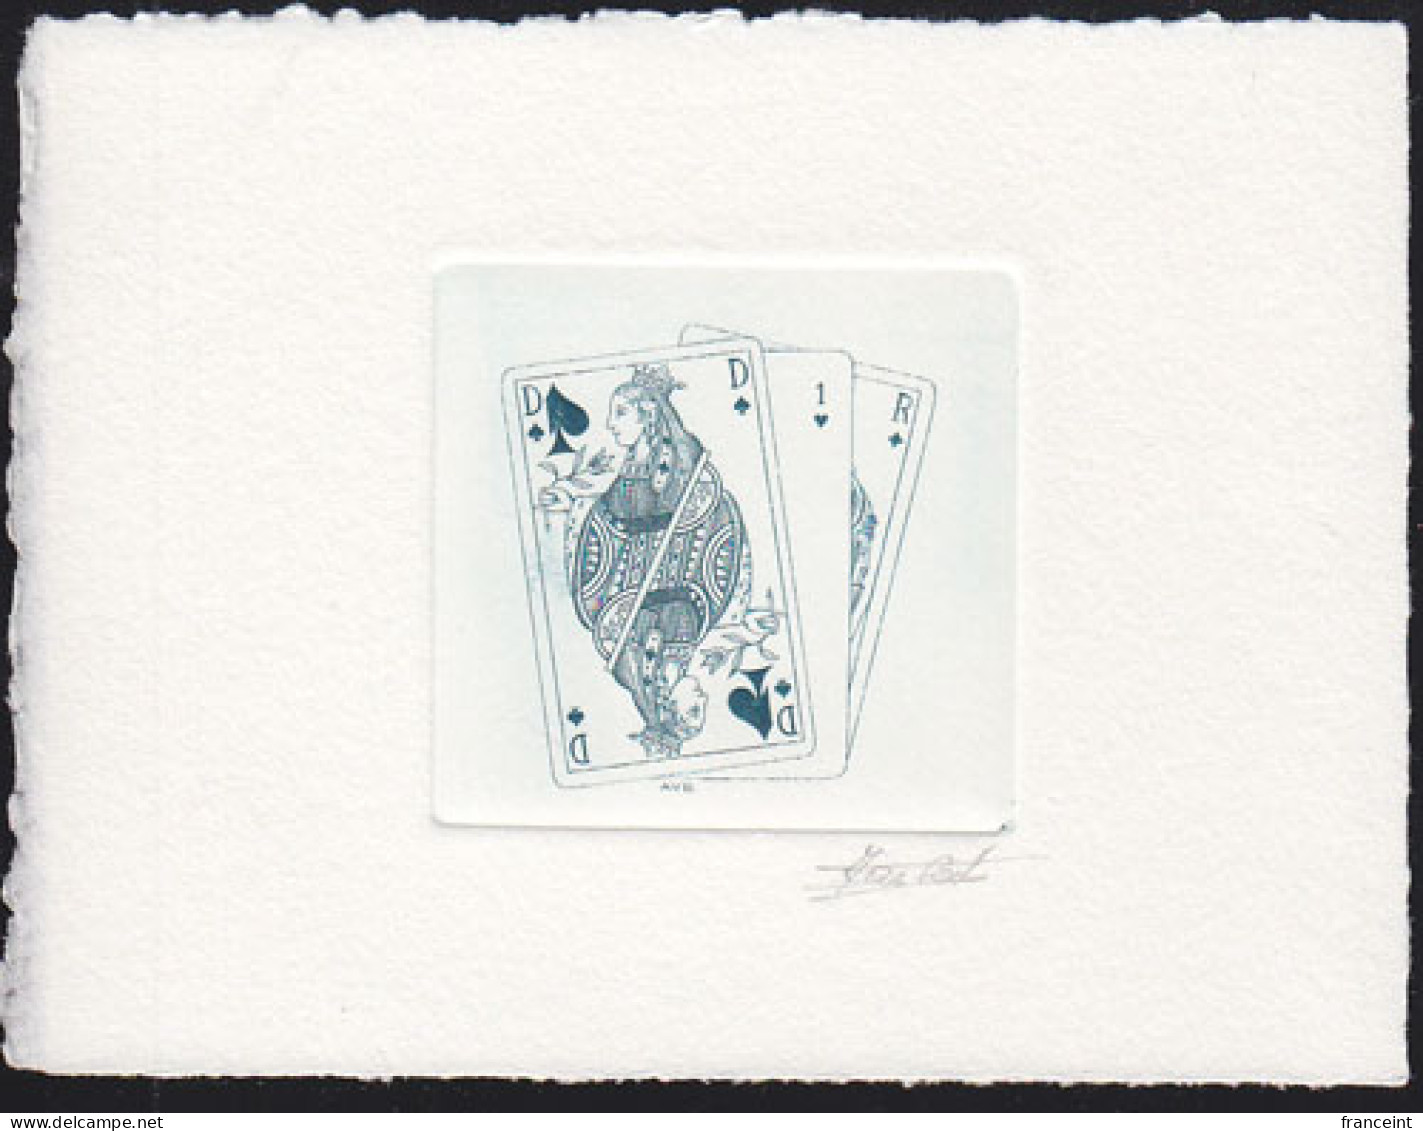 BELGIUM(1995) Playing Cards. Die Proof In Blue Signed By The Engraver, Representing The FDC Cachet. Scott No 1579 - Probe- Und Nachdrucke